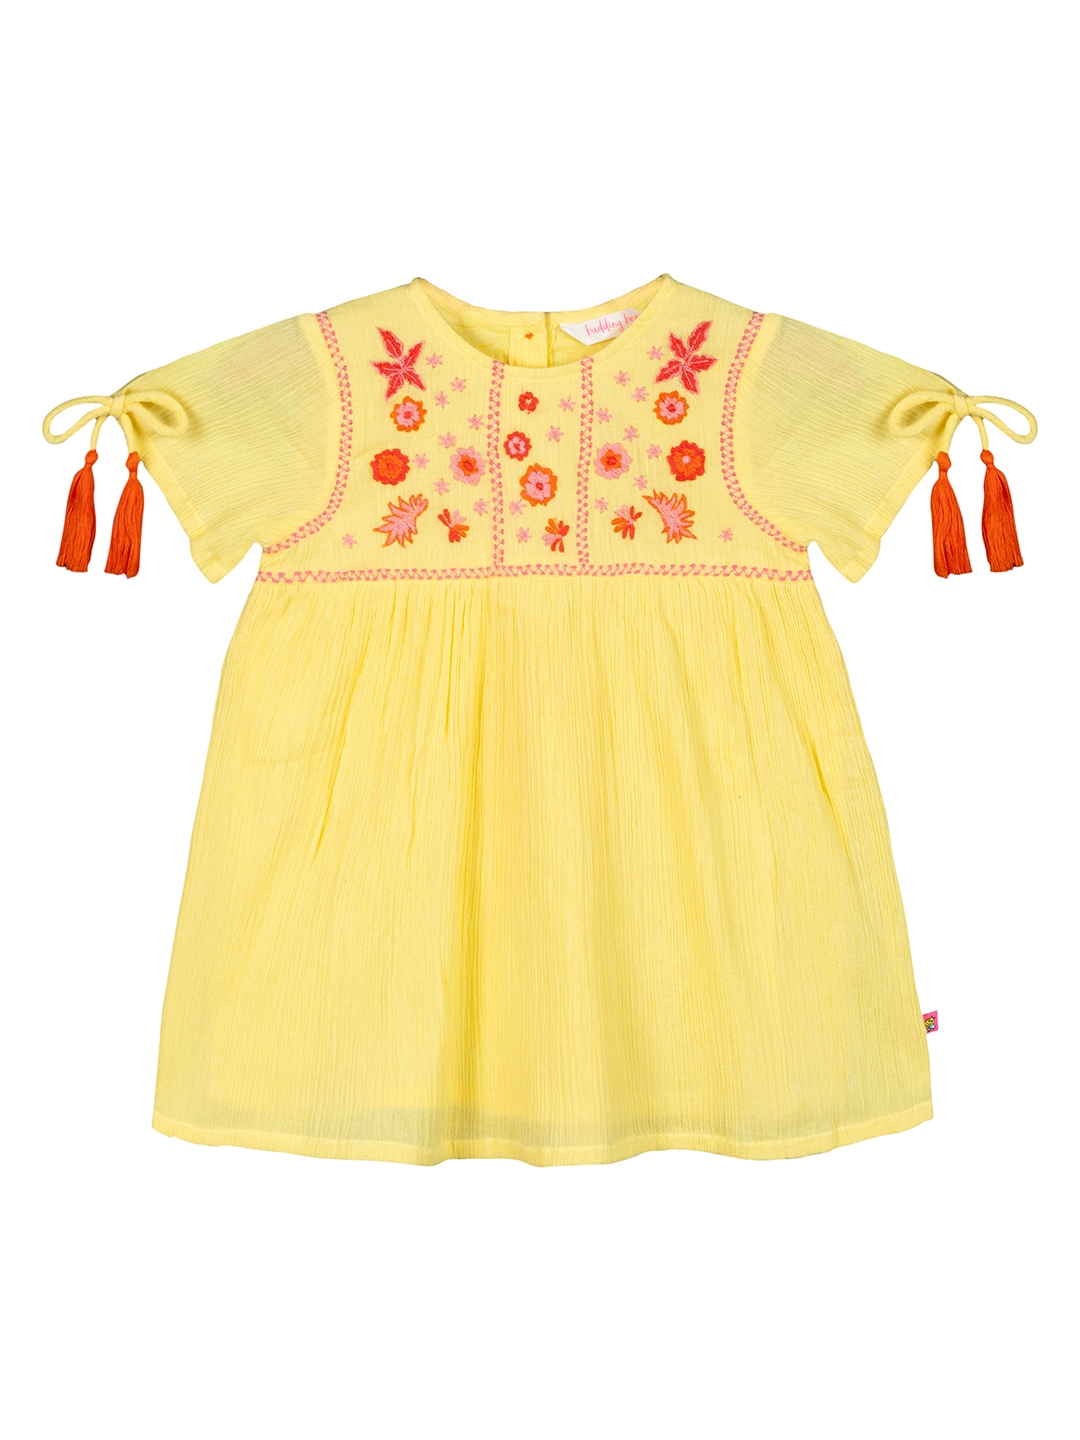 Budding Bees | Yellow Embroidered Dress